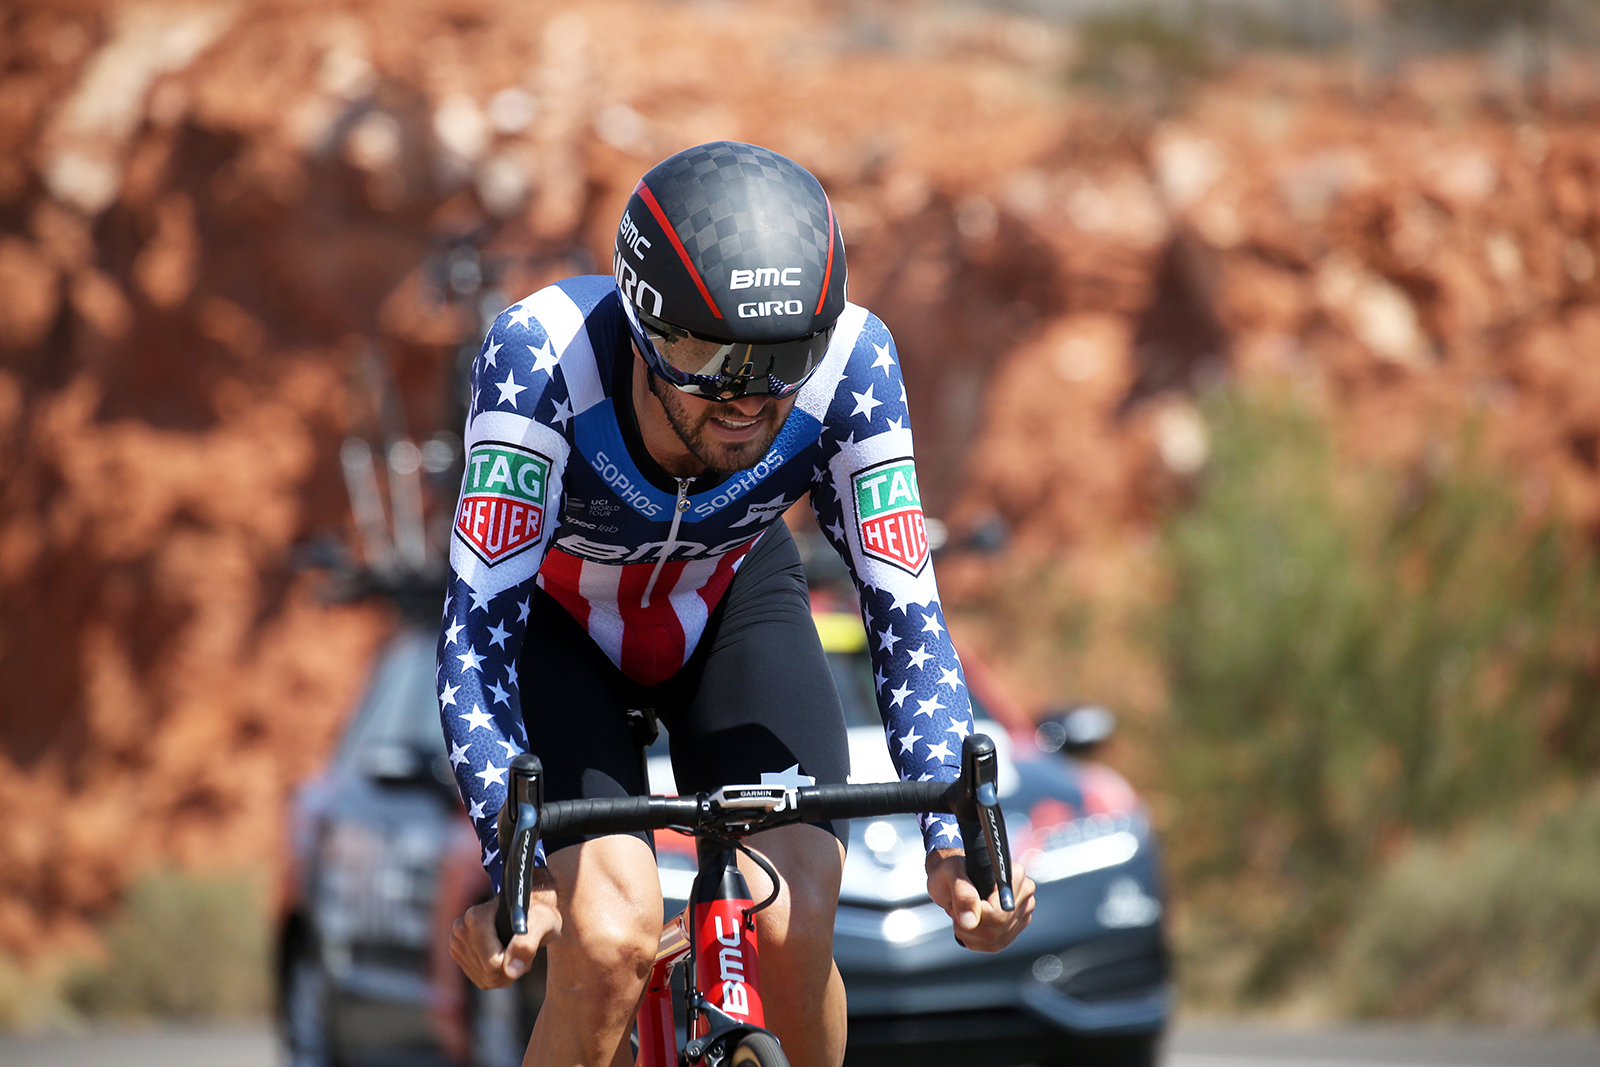 2017 and 2018 Pro ITT National Champion, Joey Rosskopf of BMC charges into 2nd place. 2018 Tour of Utah Team Prologue, August 6, 2018, St. George, Utah. Photo by Cathy Fegan-Kim, cottonsoxphotography.net